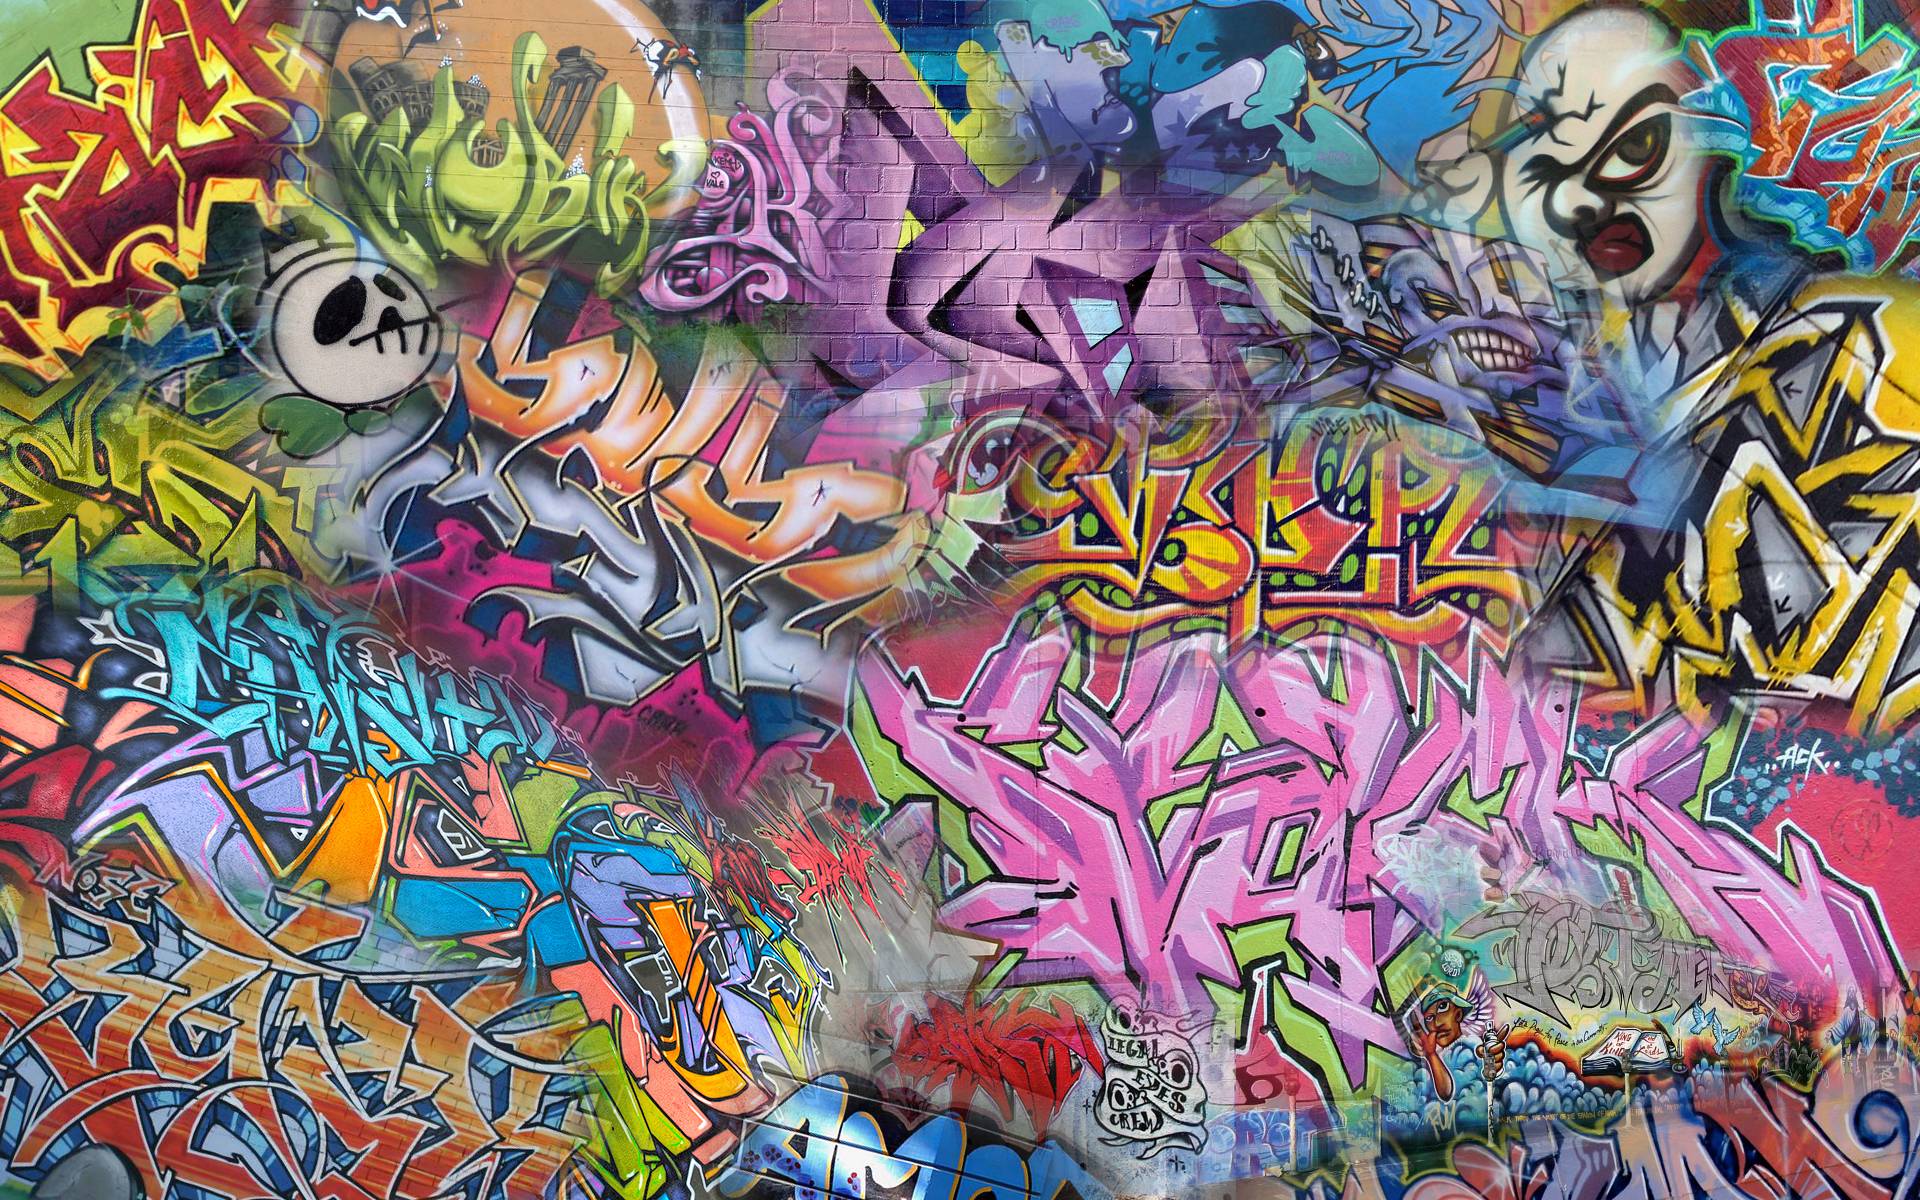 A wall of graffiti with many different colors - Graffiti